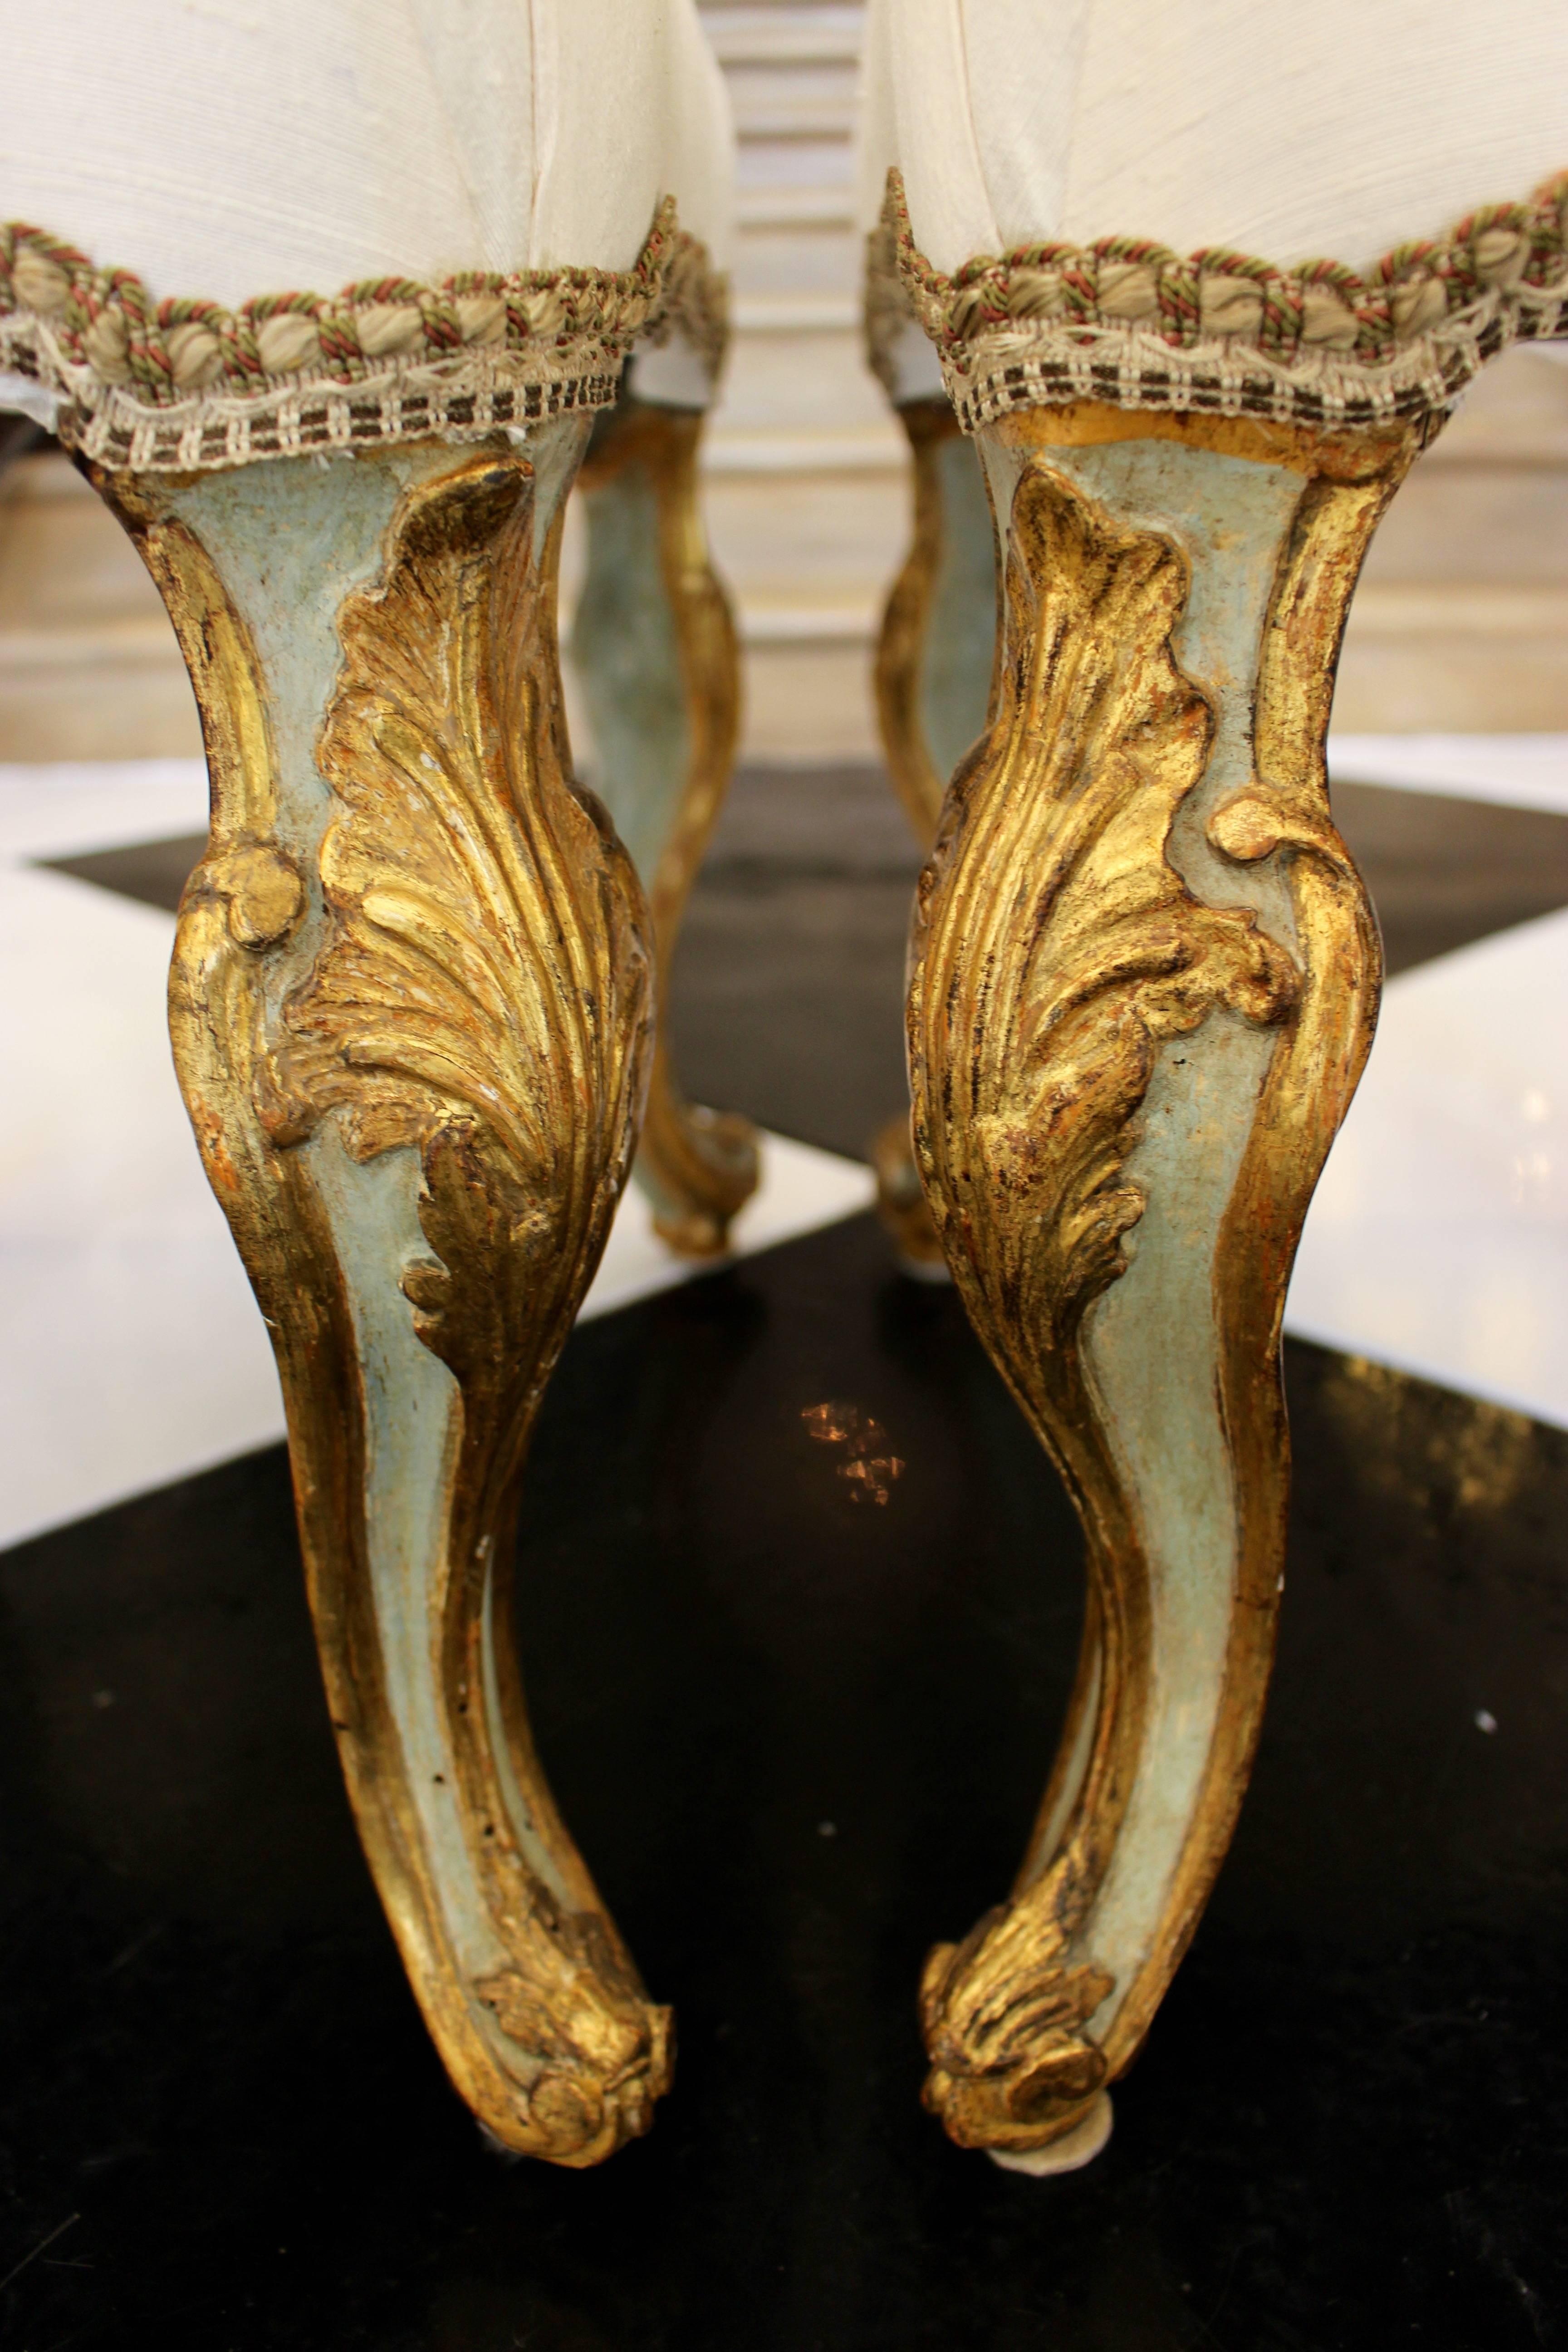 A pair of Italian Piedmontese Rococo period mid-18th century painted and parcel-gilt stools from the collection of designer Gary Tisdale-Woods, with cabriole legs and upholstery. Born during the 1750s in the Piedmont, the northwestern region of